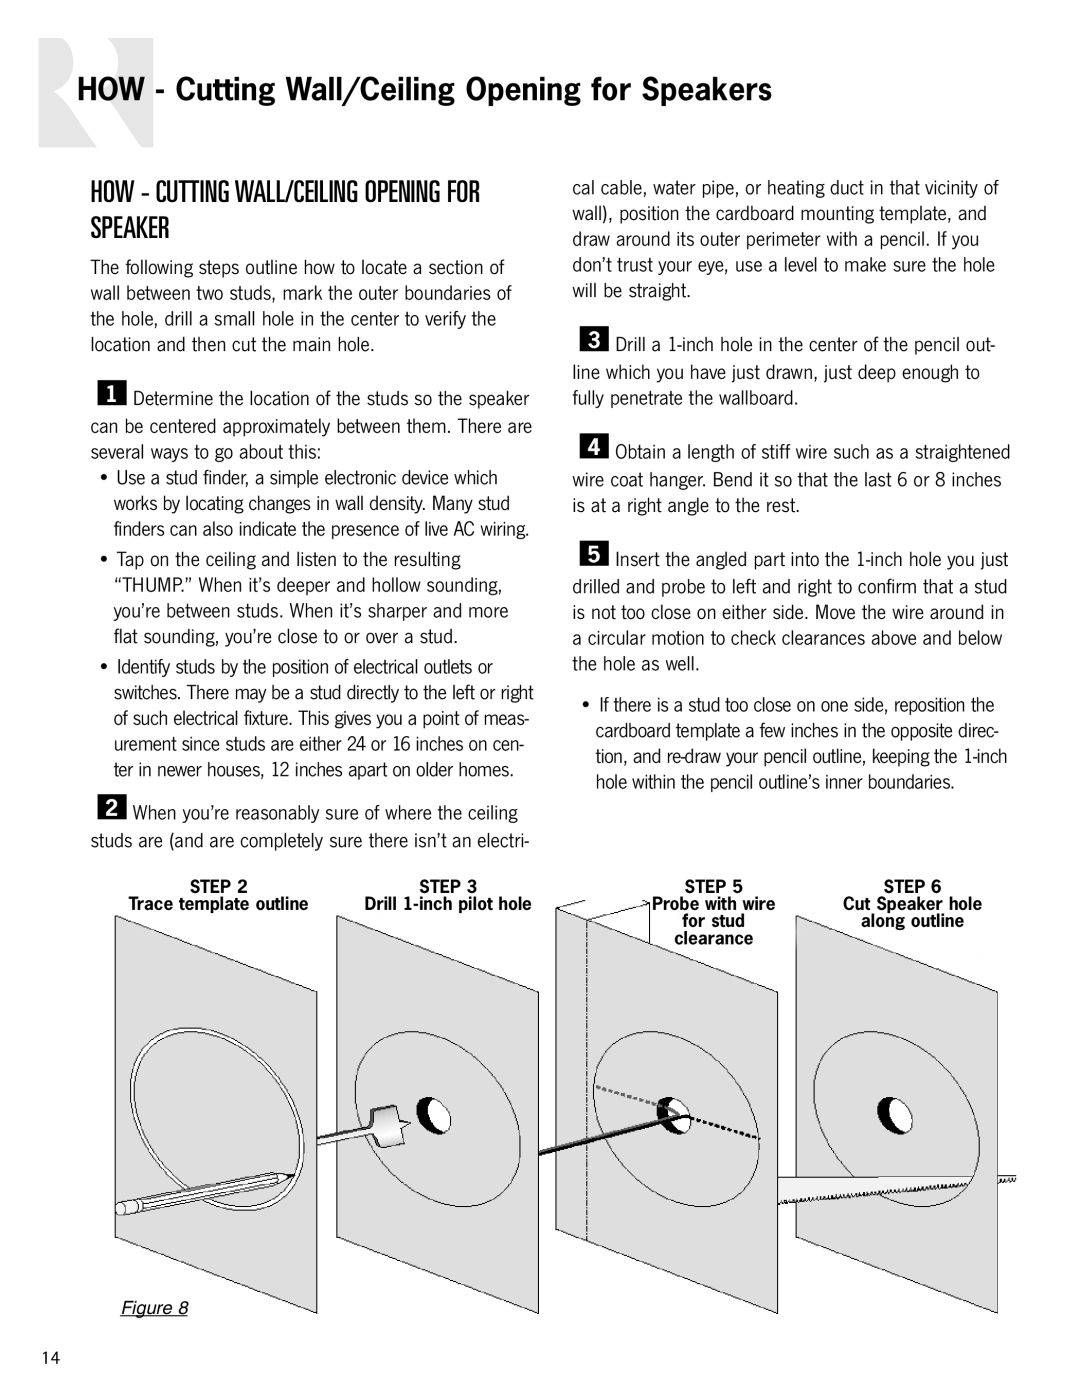 Russound In-Ceiling speaker owner manual HOW - Cutting Wall/Ceiling Opening for Speakers 